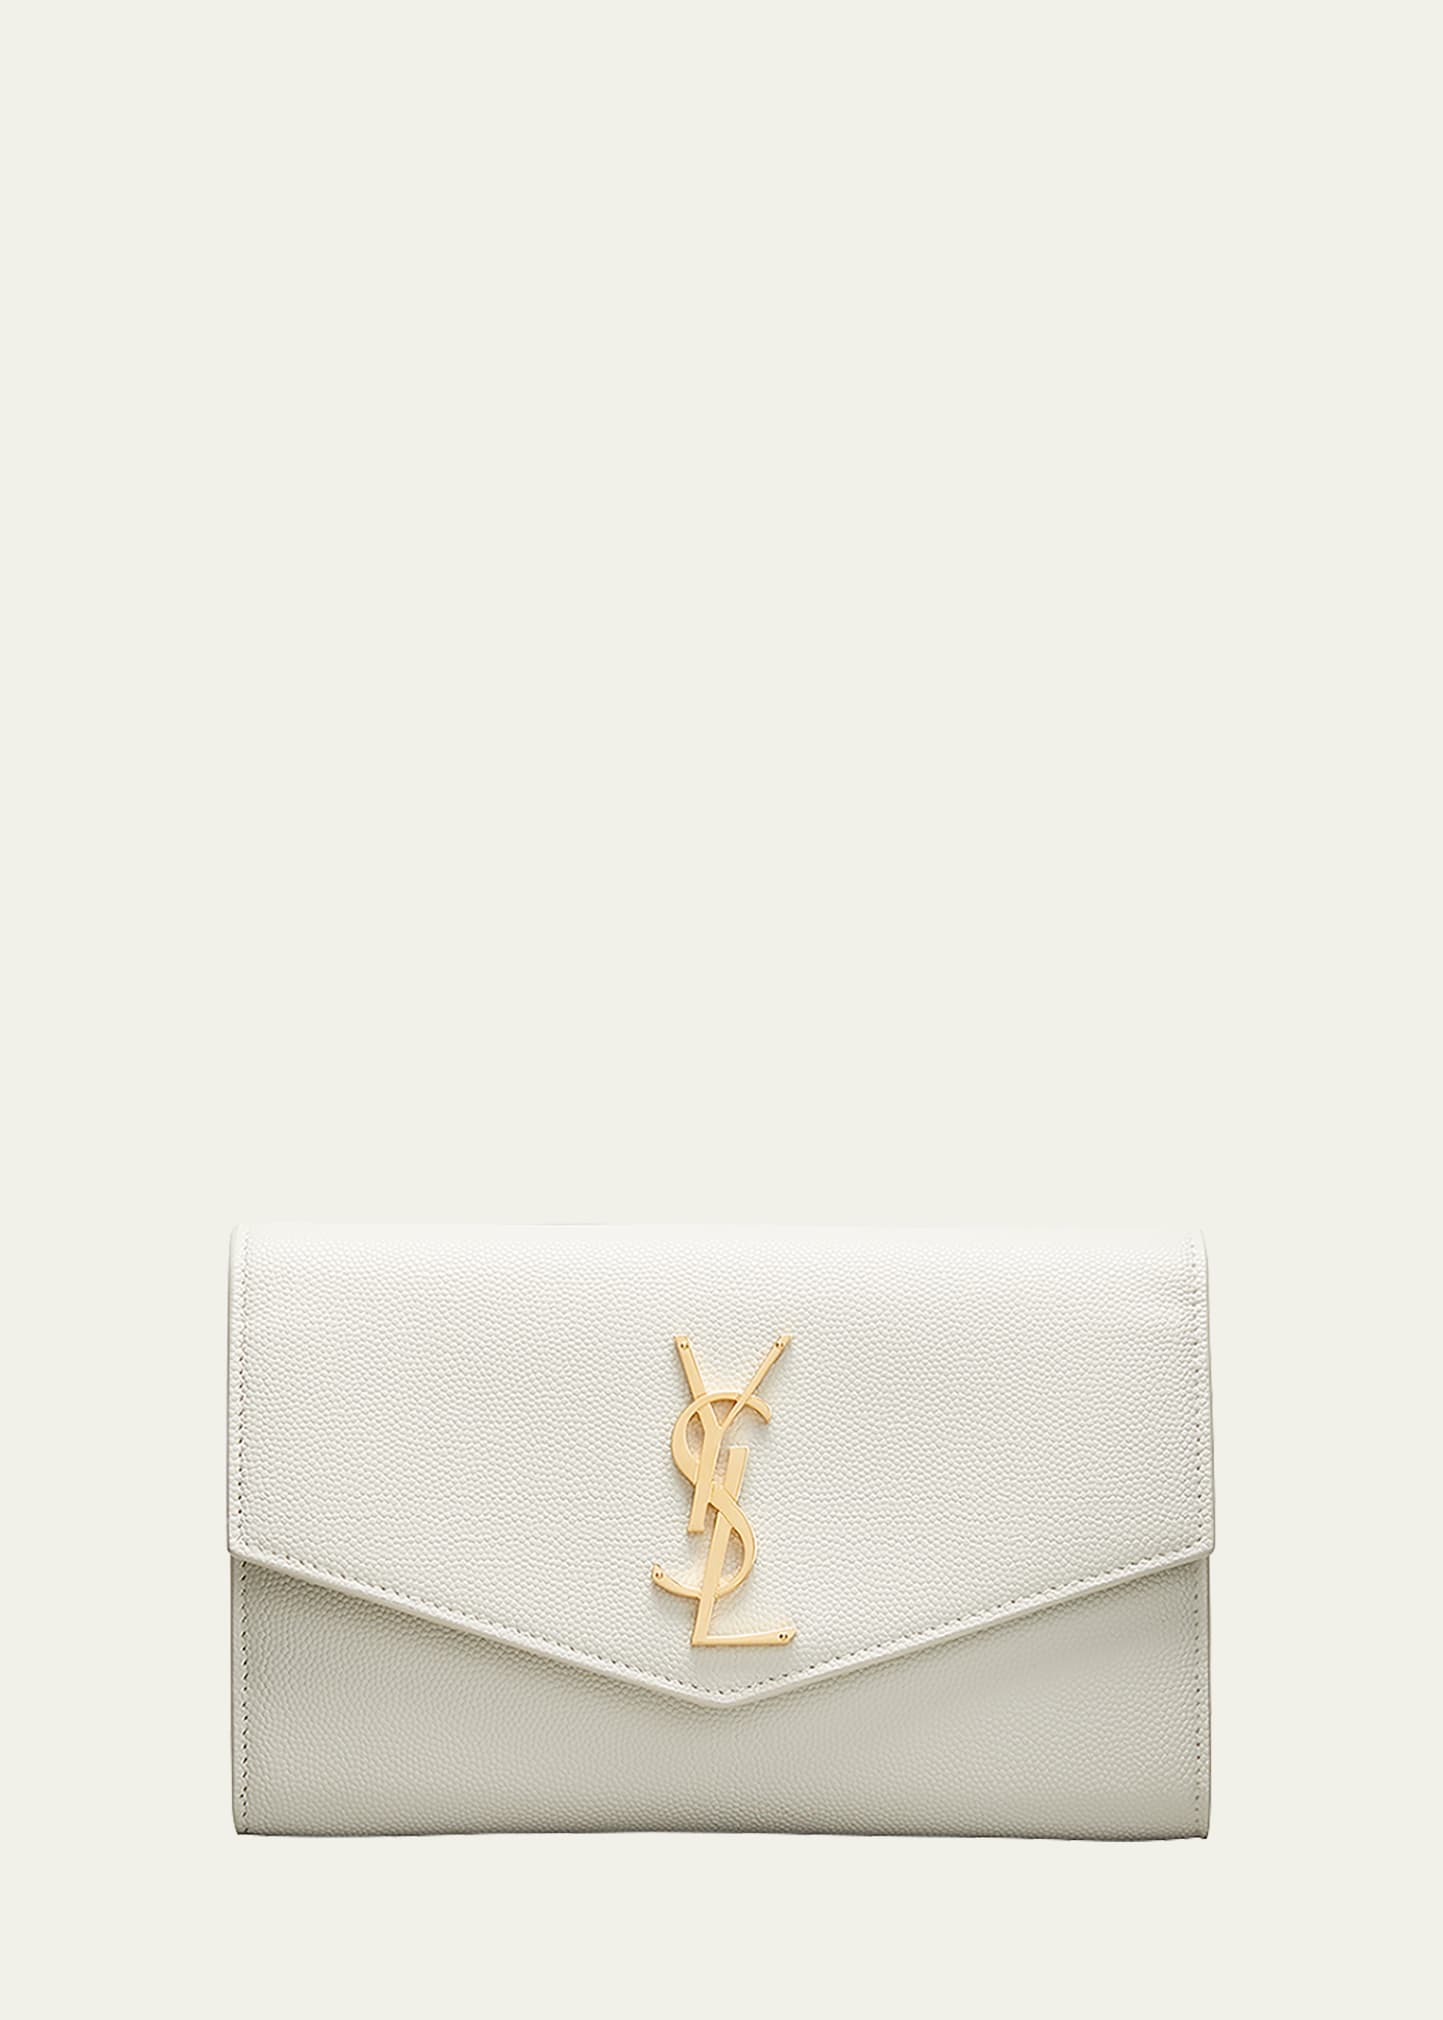 Saint Laurent Uptown Ysl Wallet On Chain In Grained Leather In White